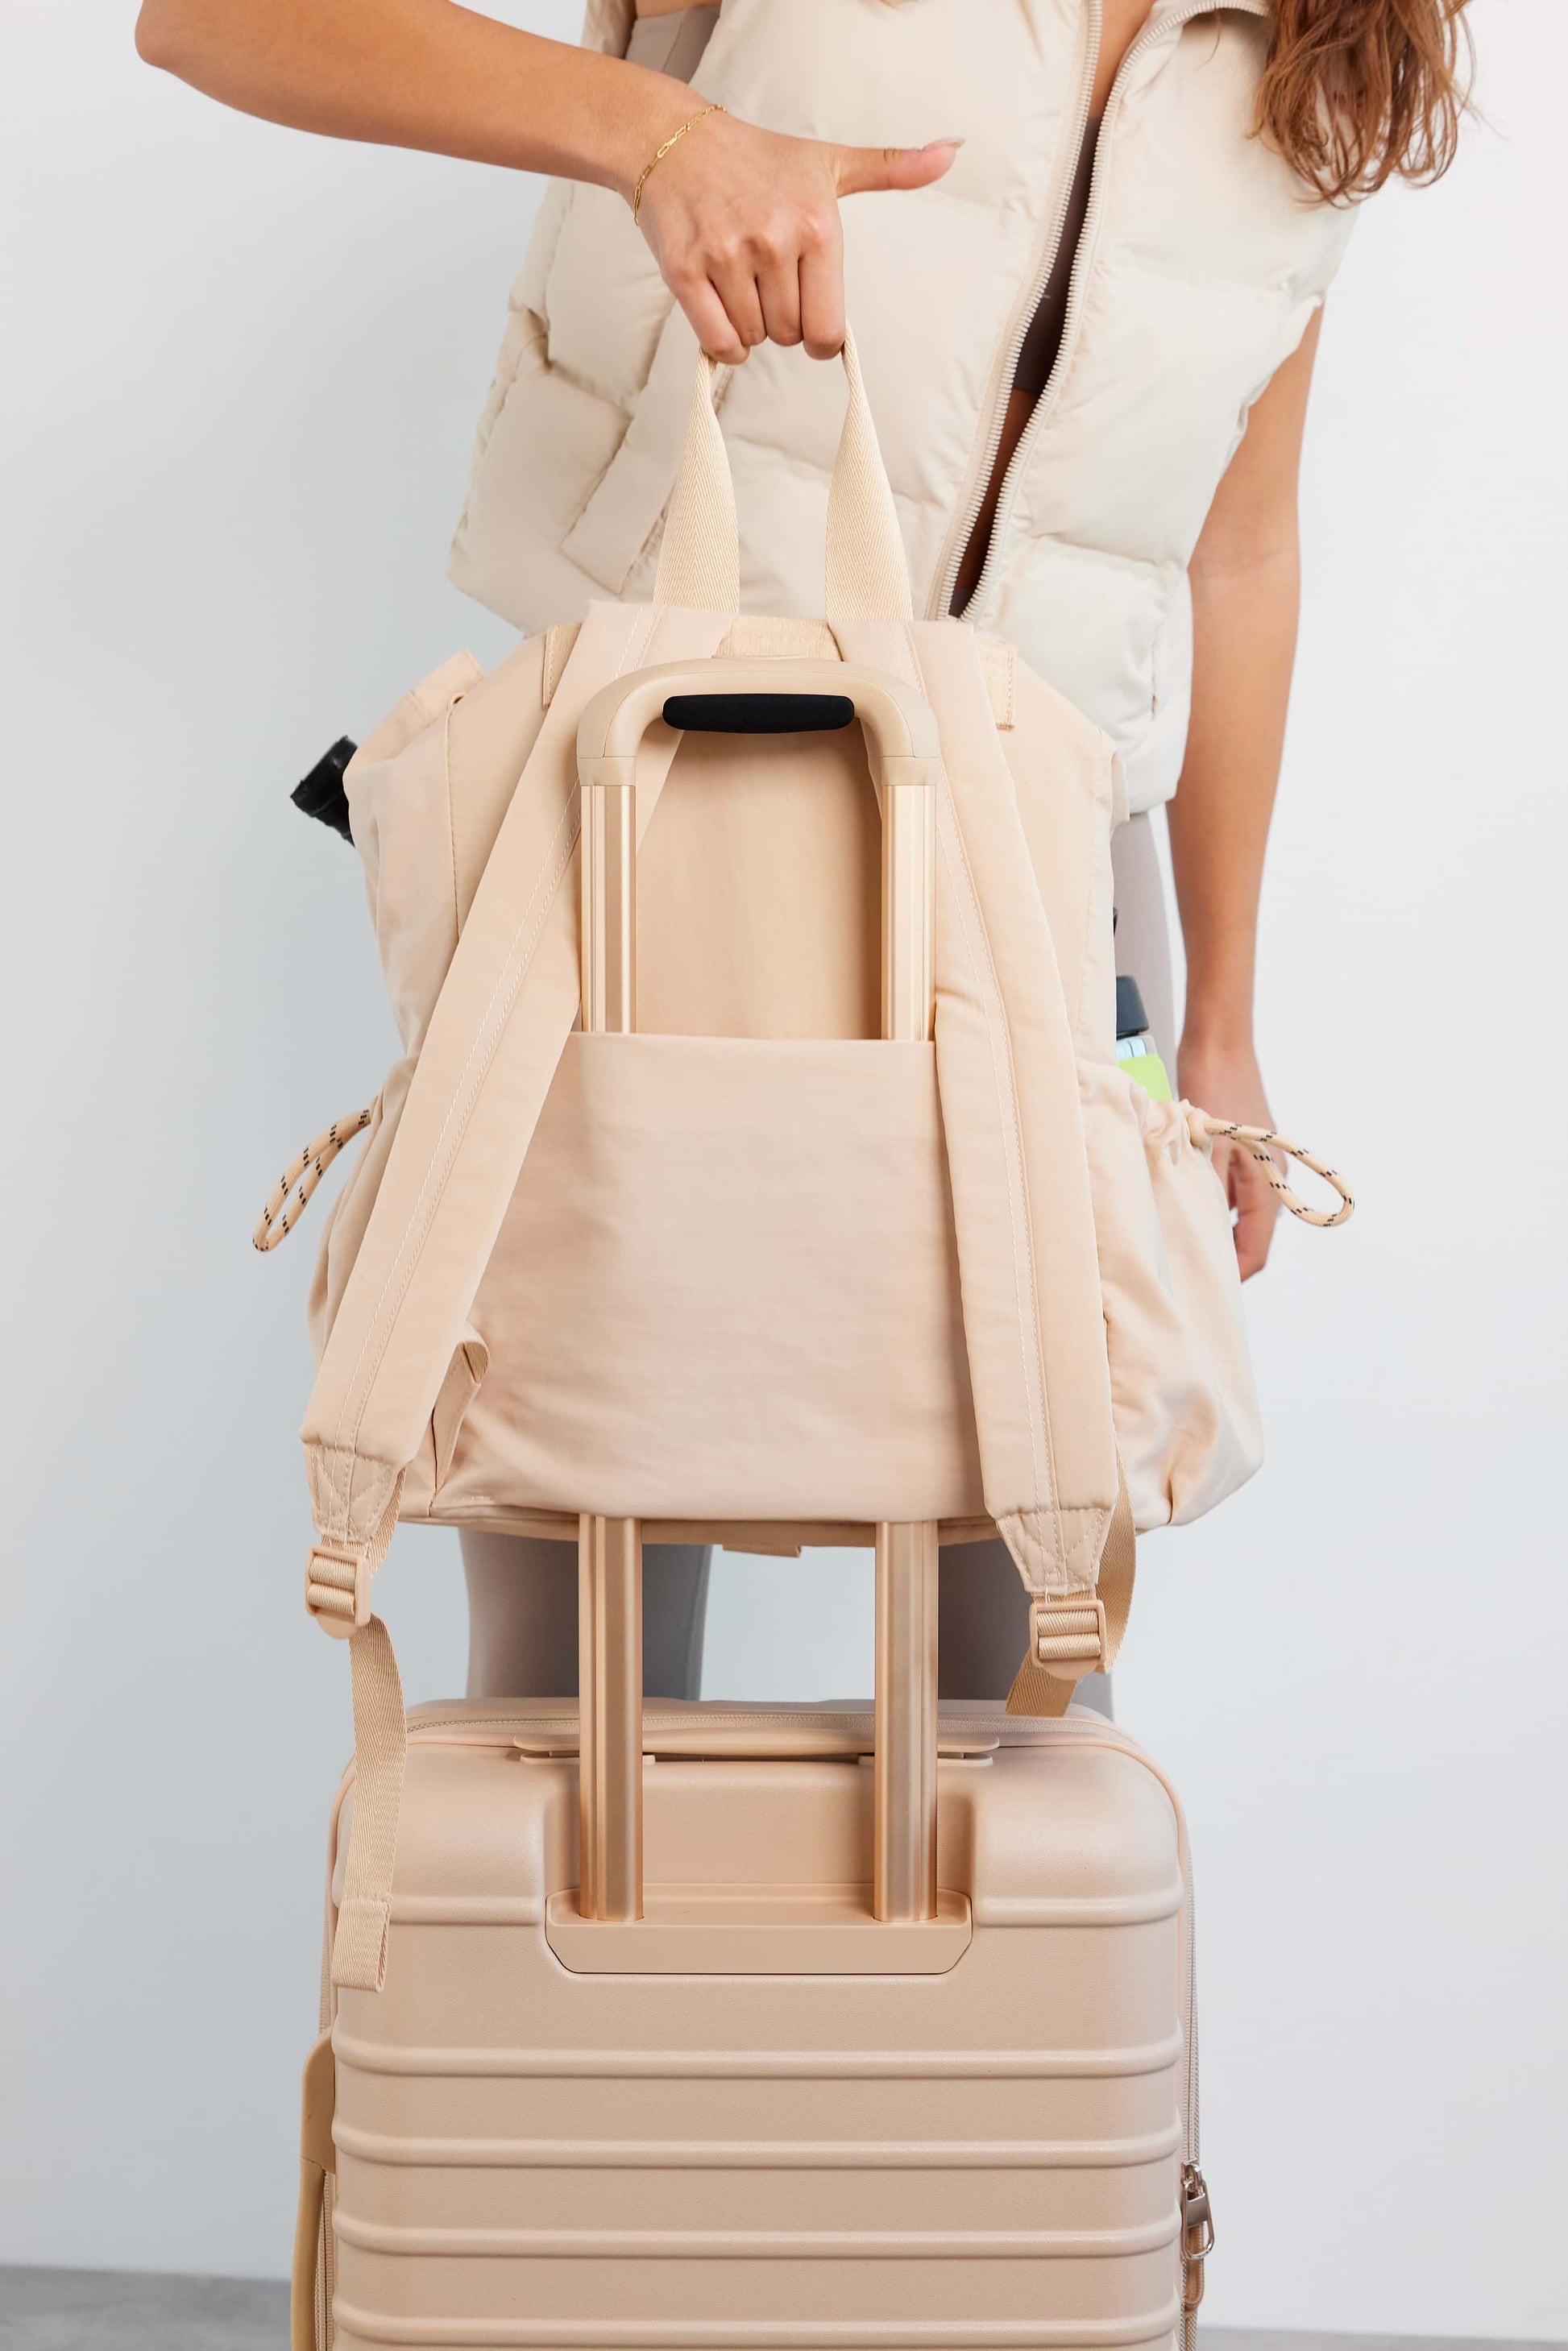 The Sport Backpack in Beige - Chic Tennis Inspired Backpack